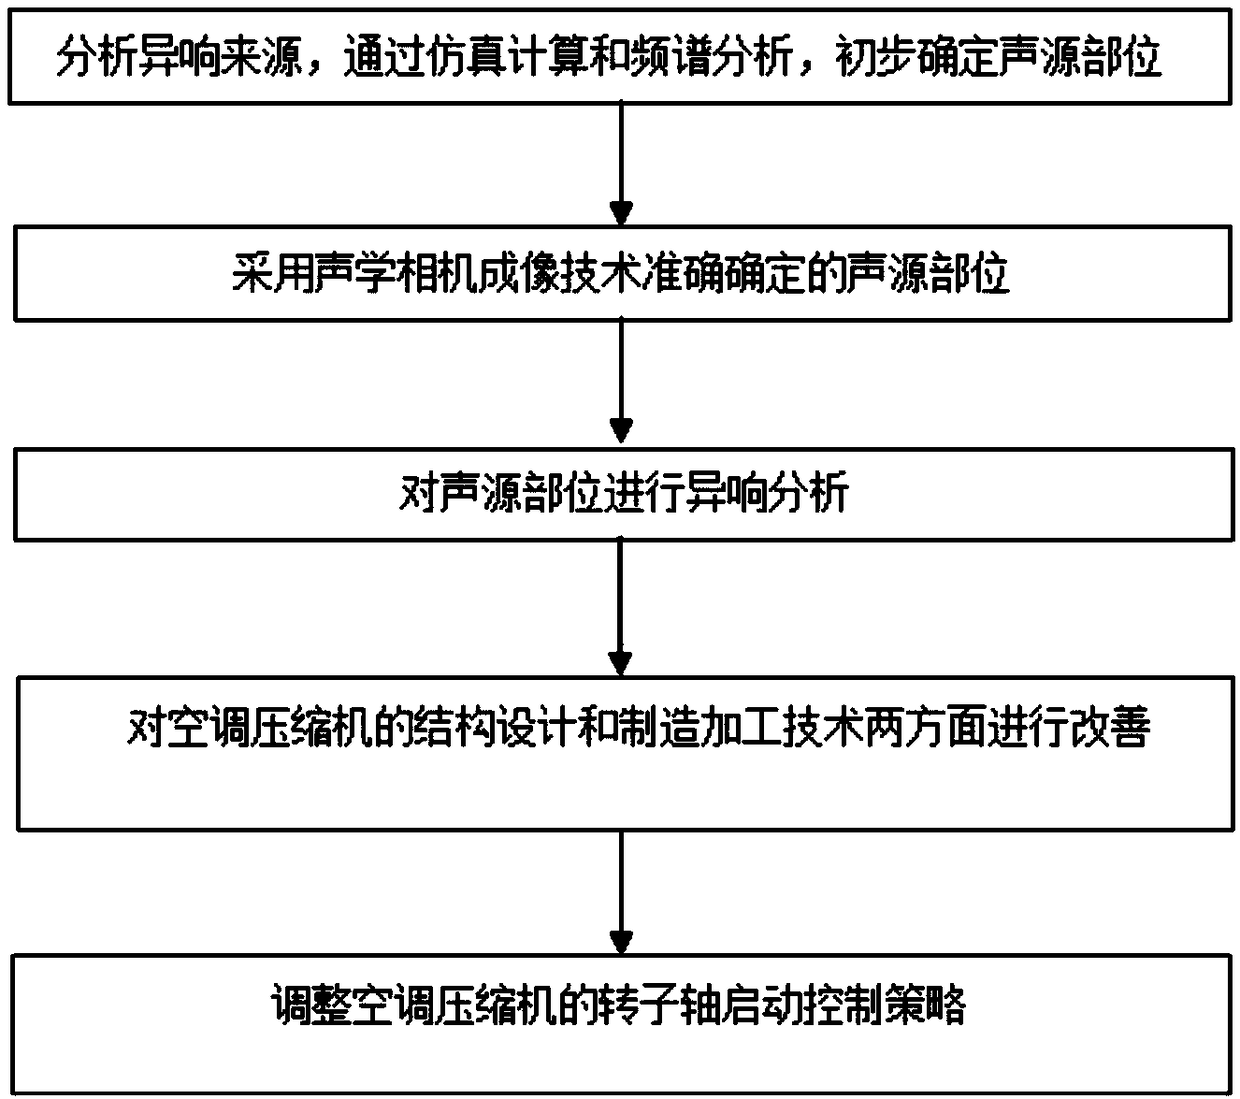 Diagnosis and improvement method for low-frequency abnormal sound of air conditioning compressor under idling working condition of blade electric vehicle